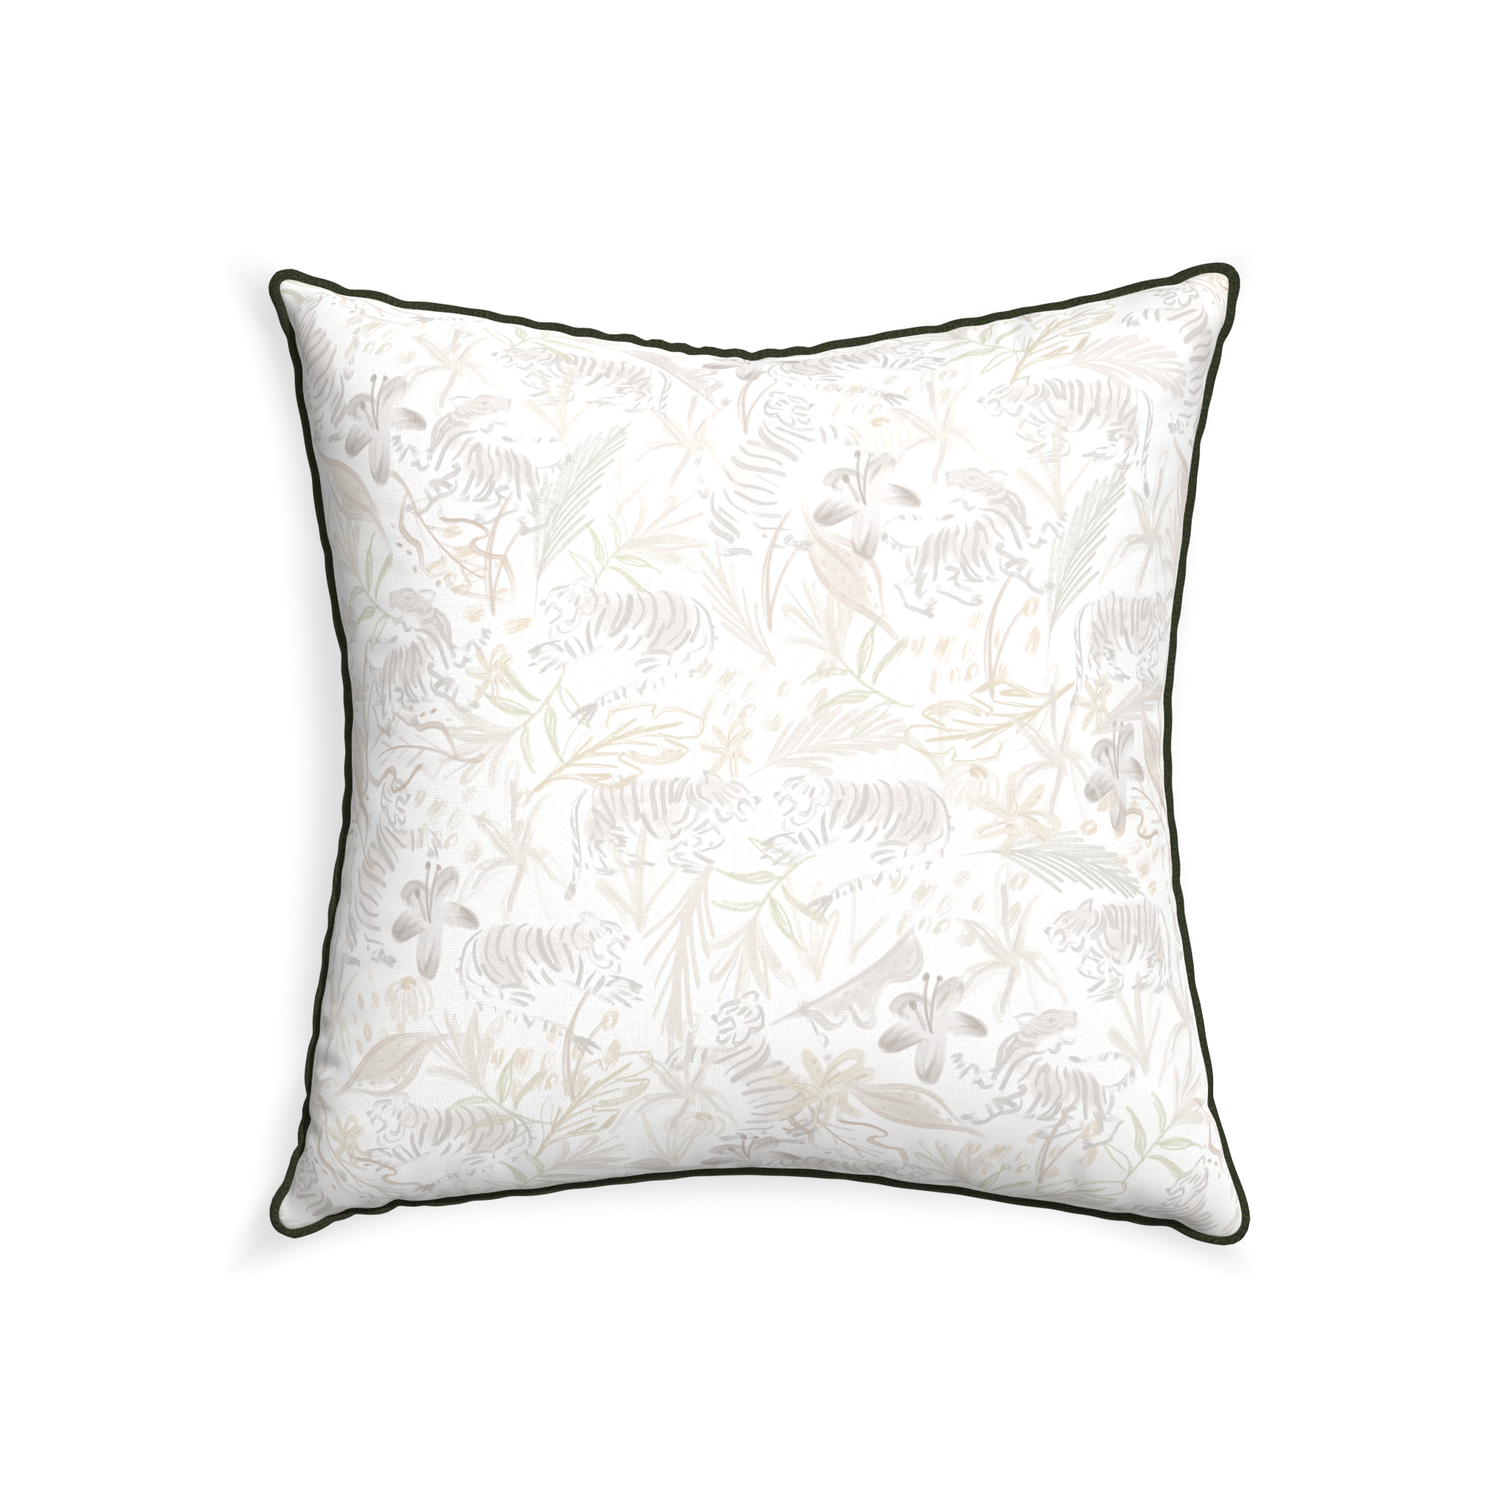 22-square frida sand custom beige chinoiserie tigerpillow with f piping on white background